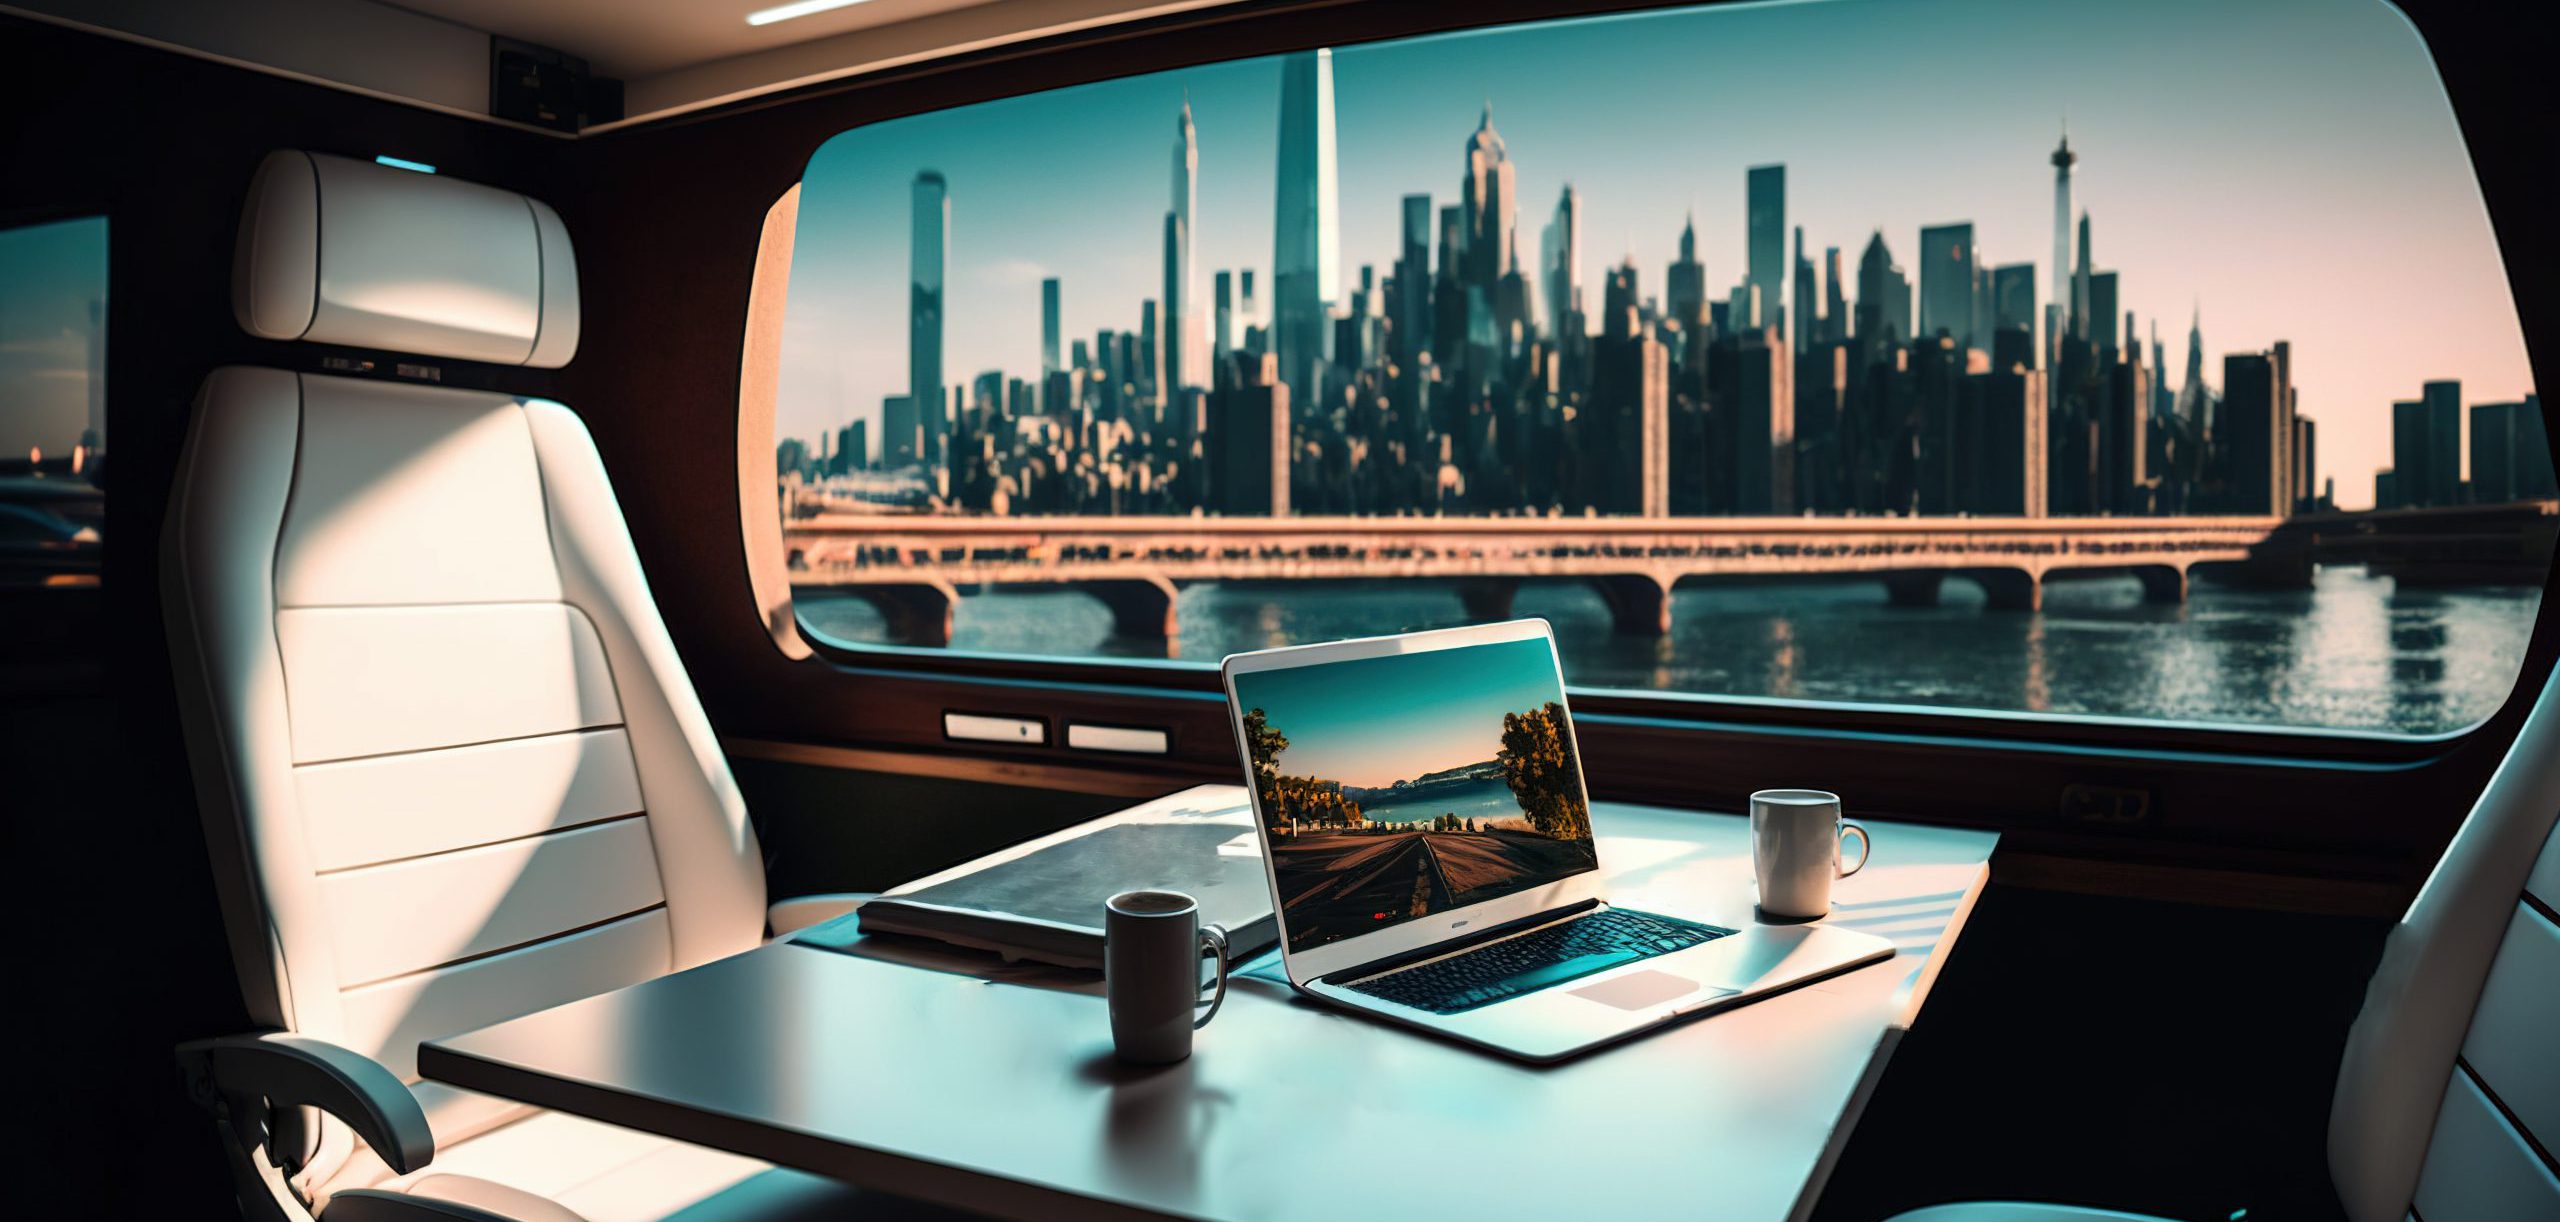 The growing role of Wi-Fi in the rail industry